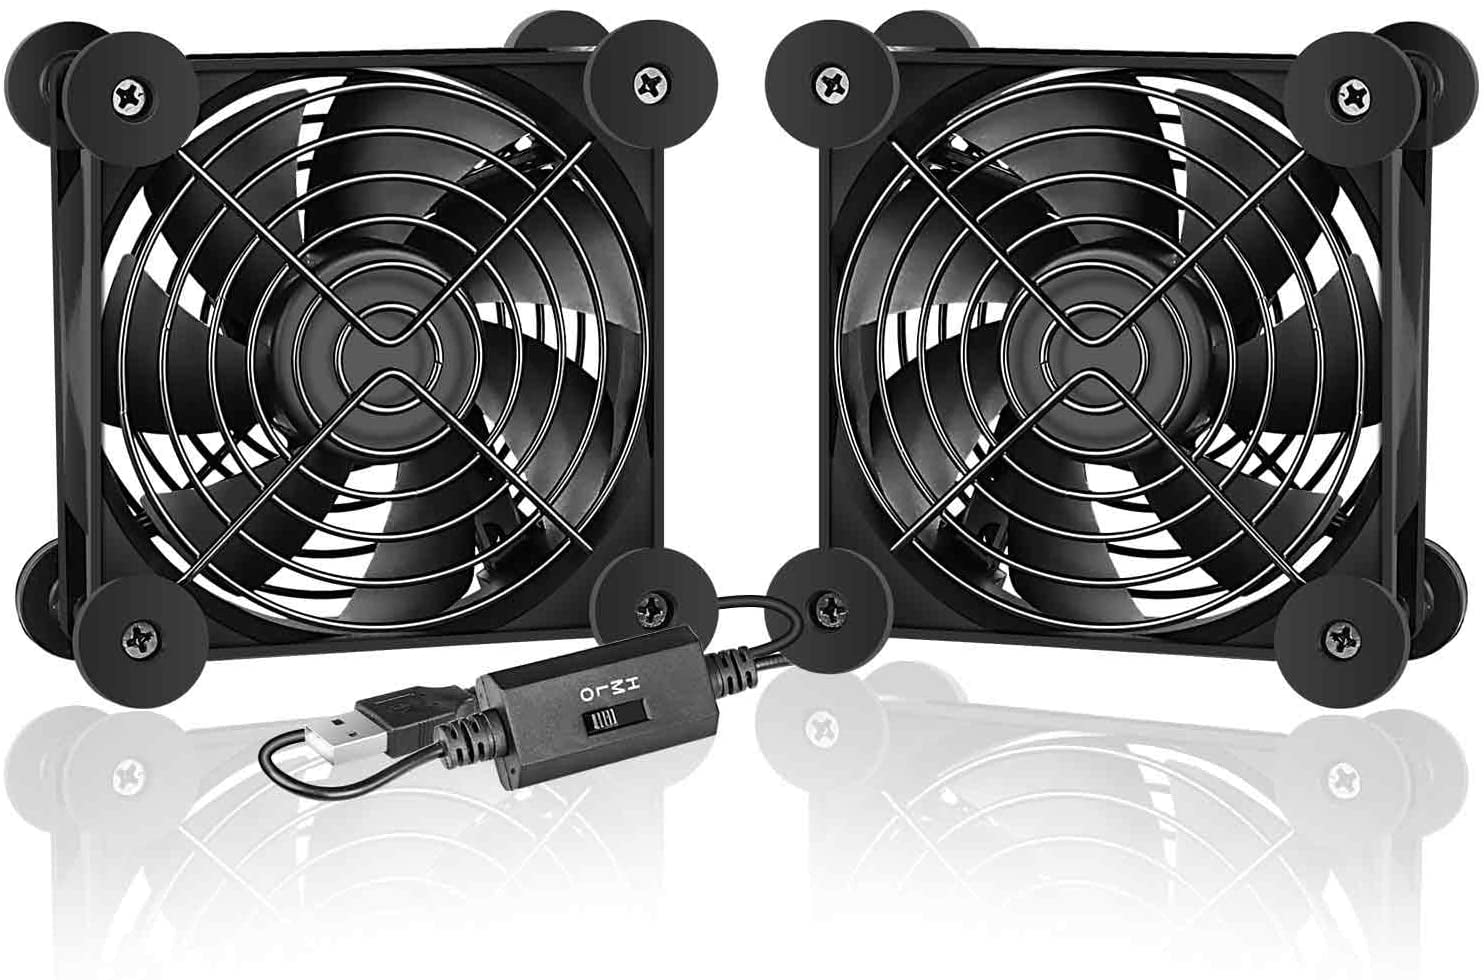 AC Infinity MULTIFAN S4 Quiet 140mm USB Fan for Receiver DVR Playstation Xbox Computer Cabinet Cooling